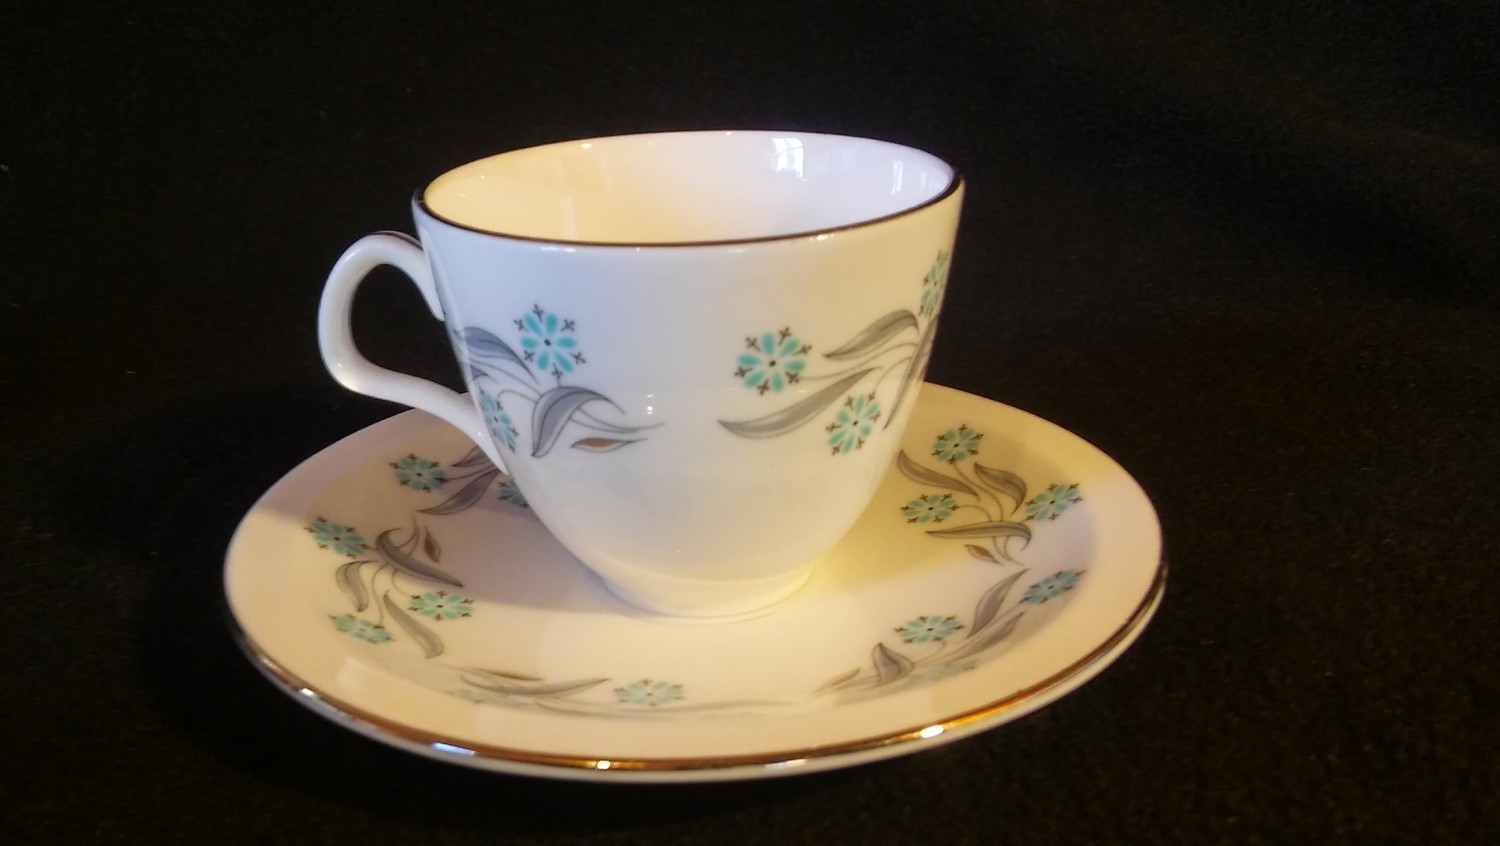 Foley Fine Bone China, Dematisse Cup & Saucer, Prelude Pattern by Maureen Tanner - 3920